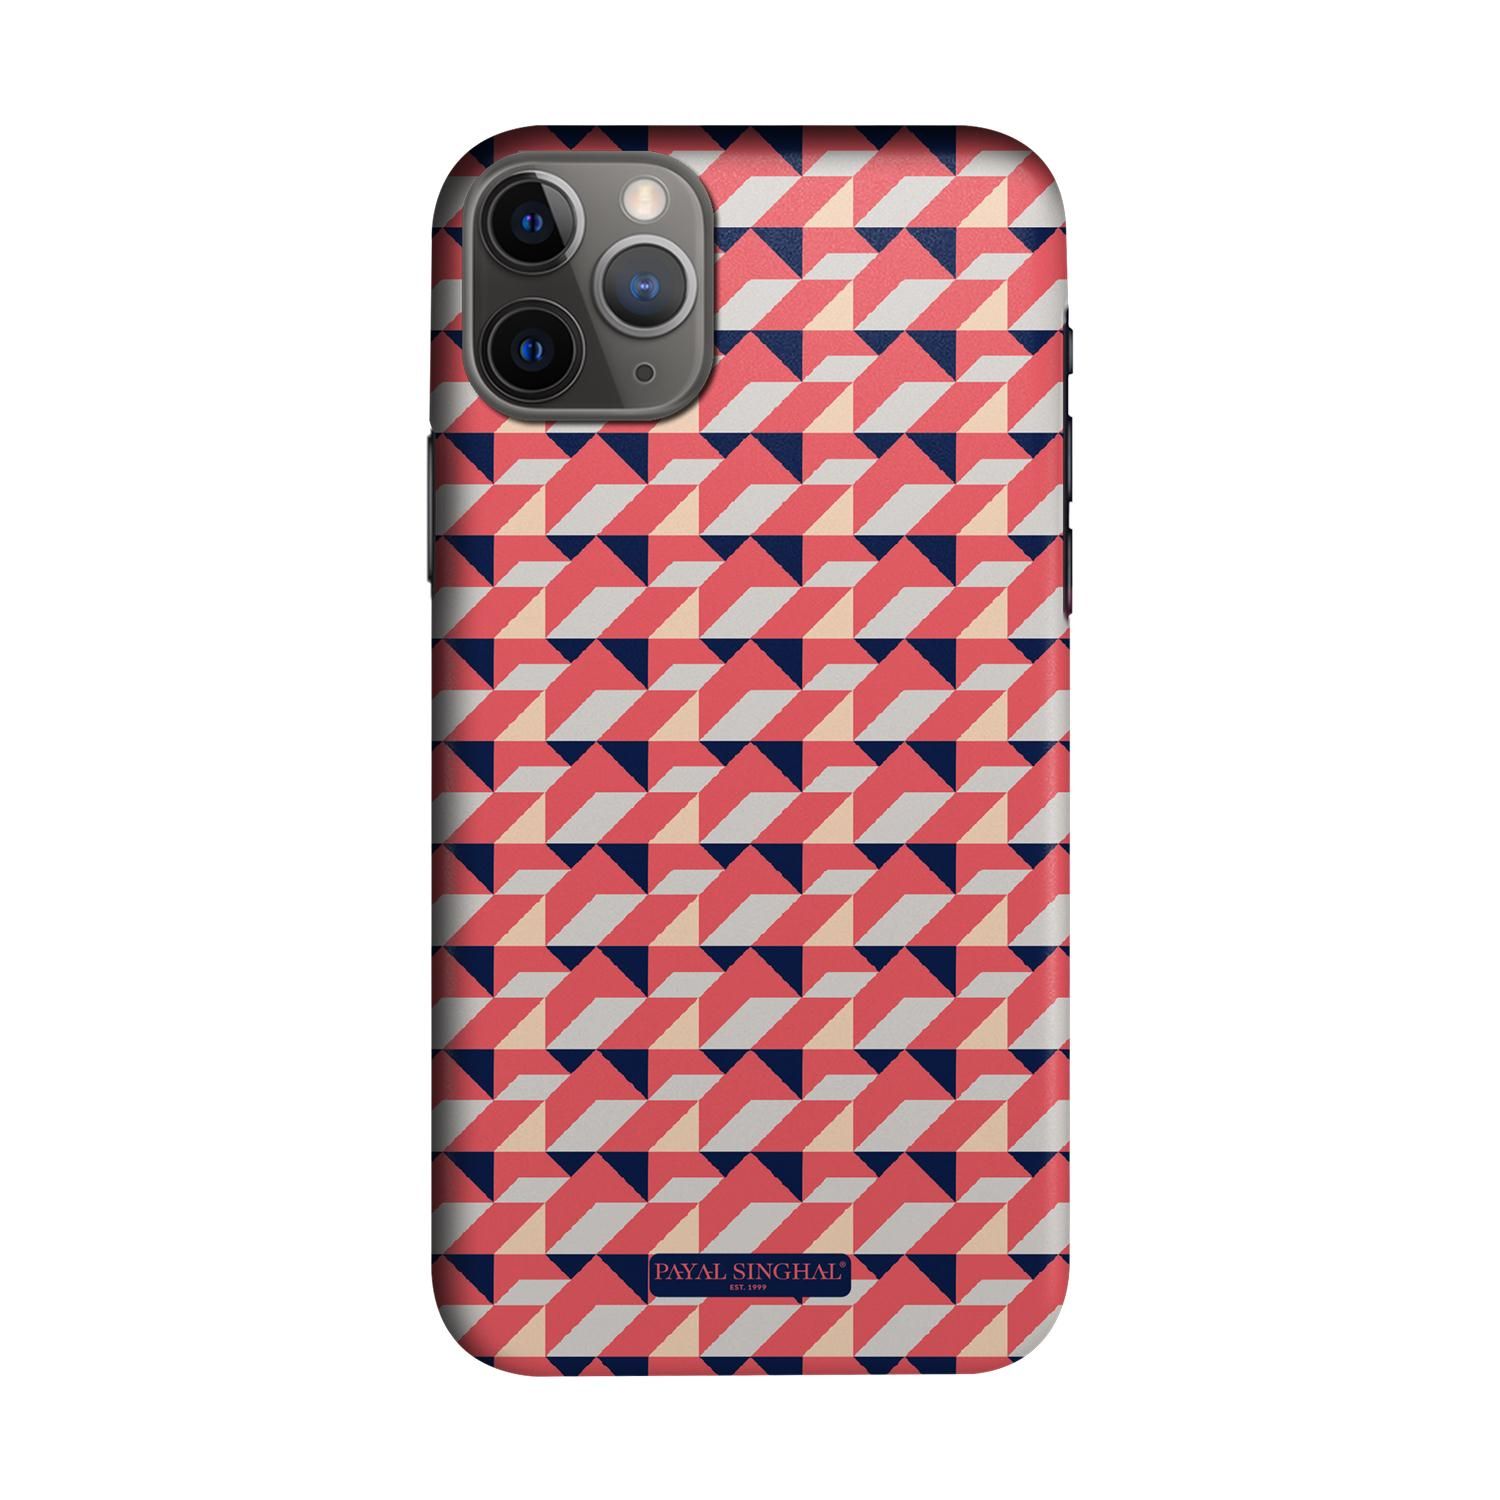 Buy Payal Singhal Coral Navy - Sleek Phone Case for iPhone 11 Pro Max Online